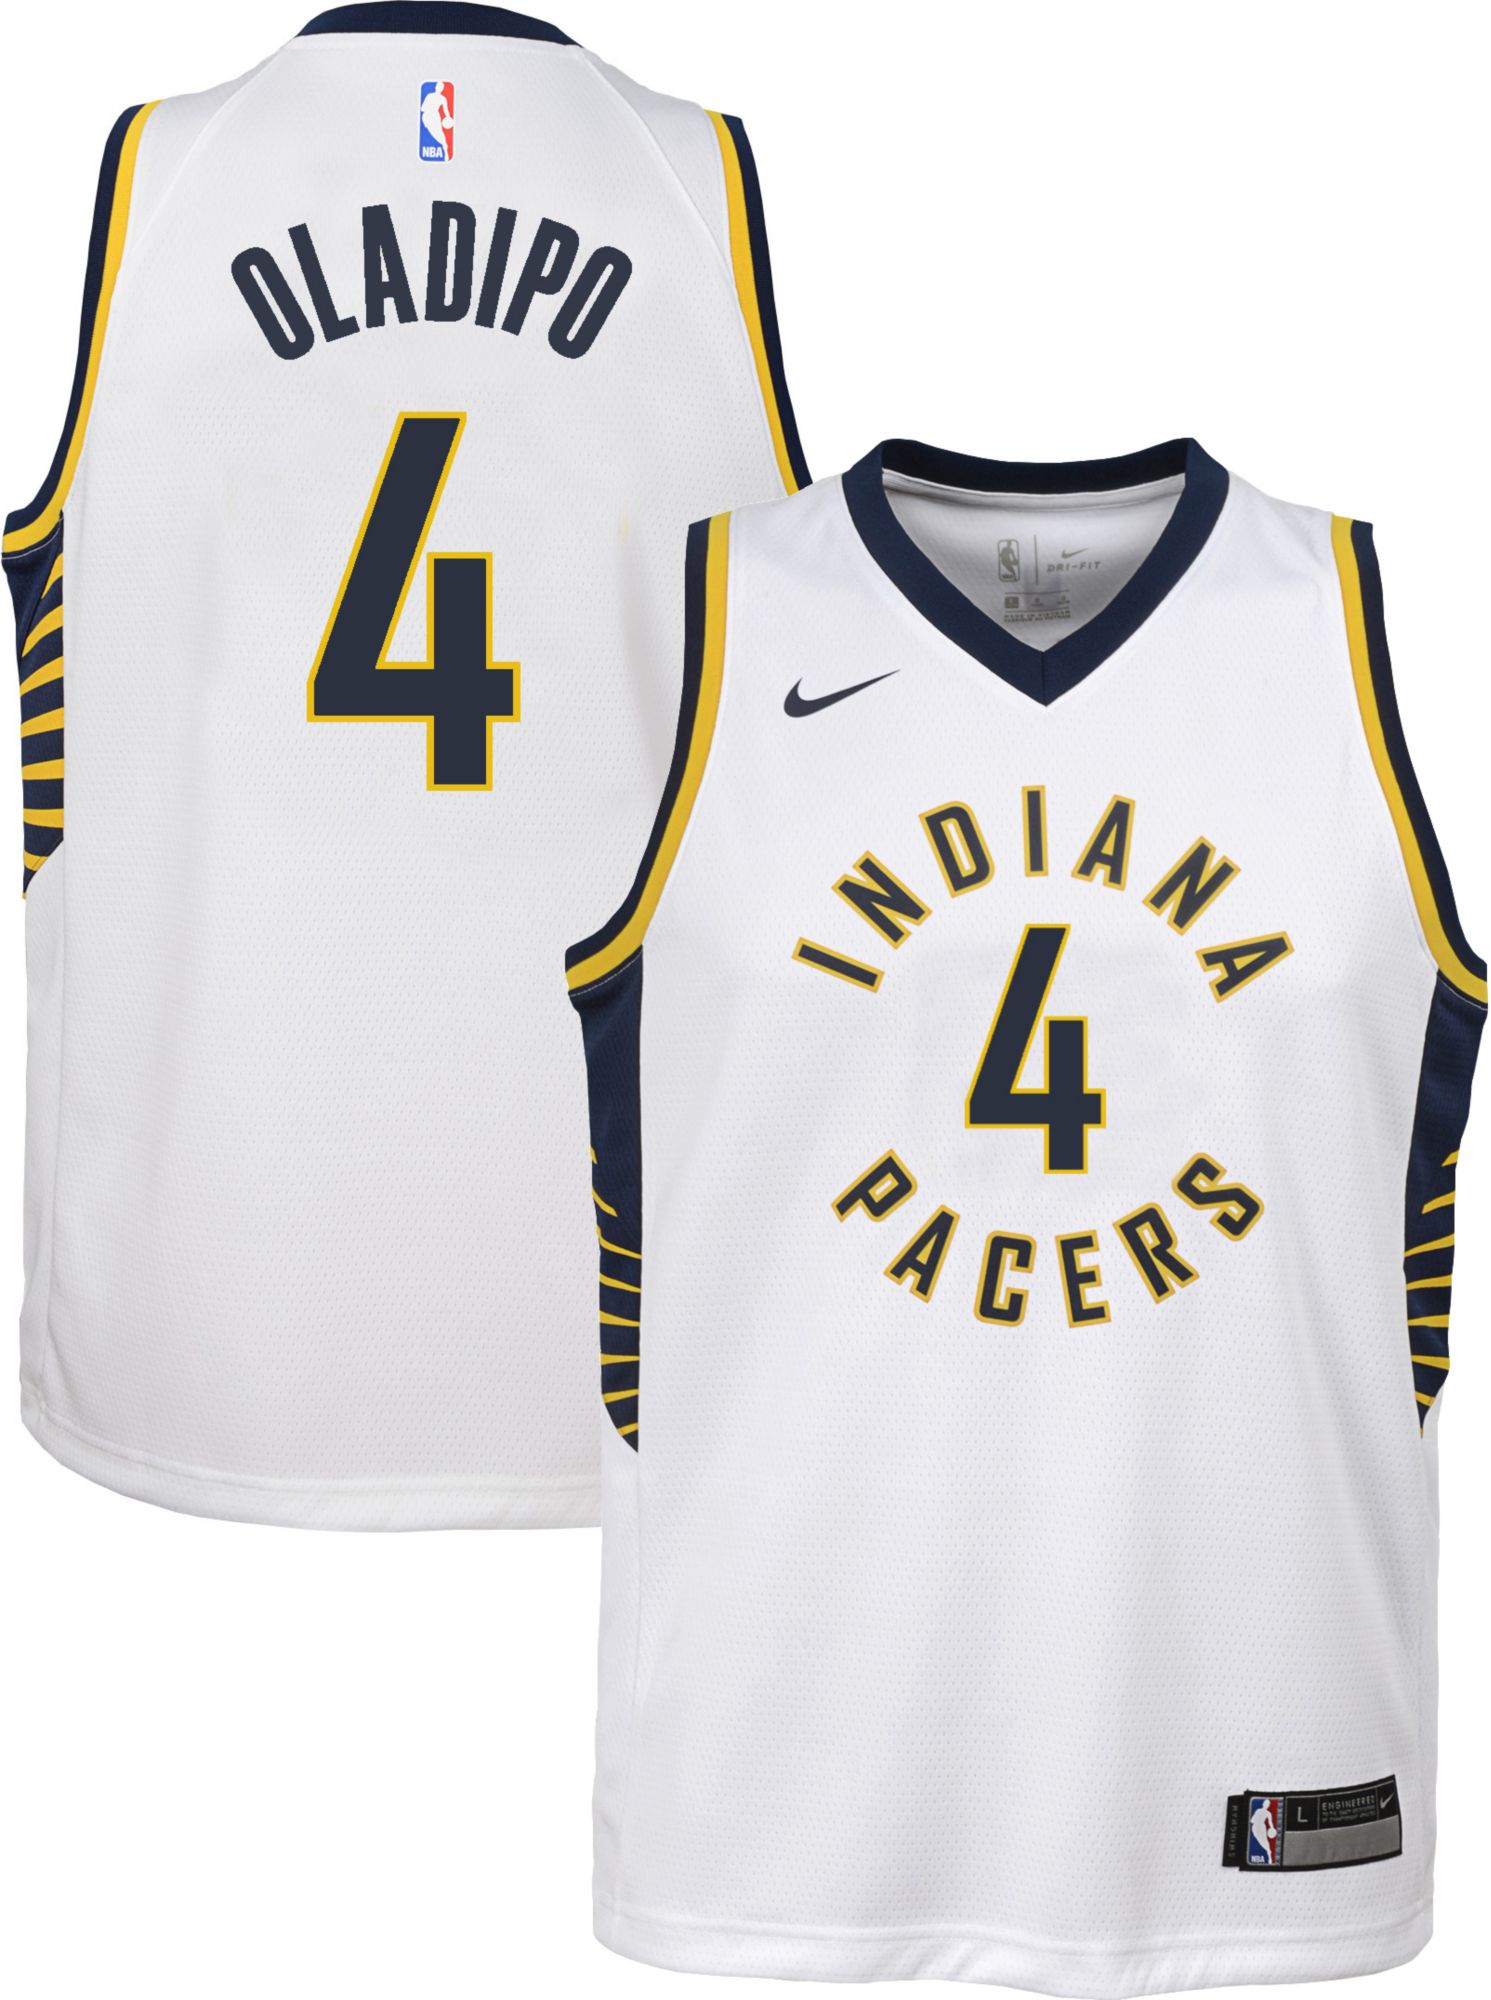 Indiana Pacers Victor Oladipo #4 White 